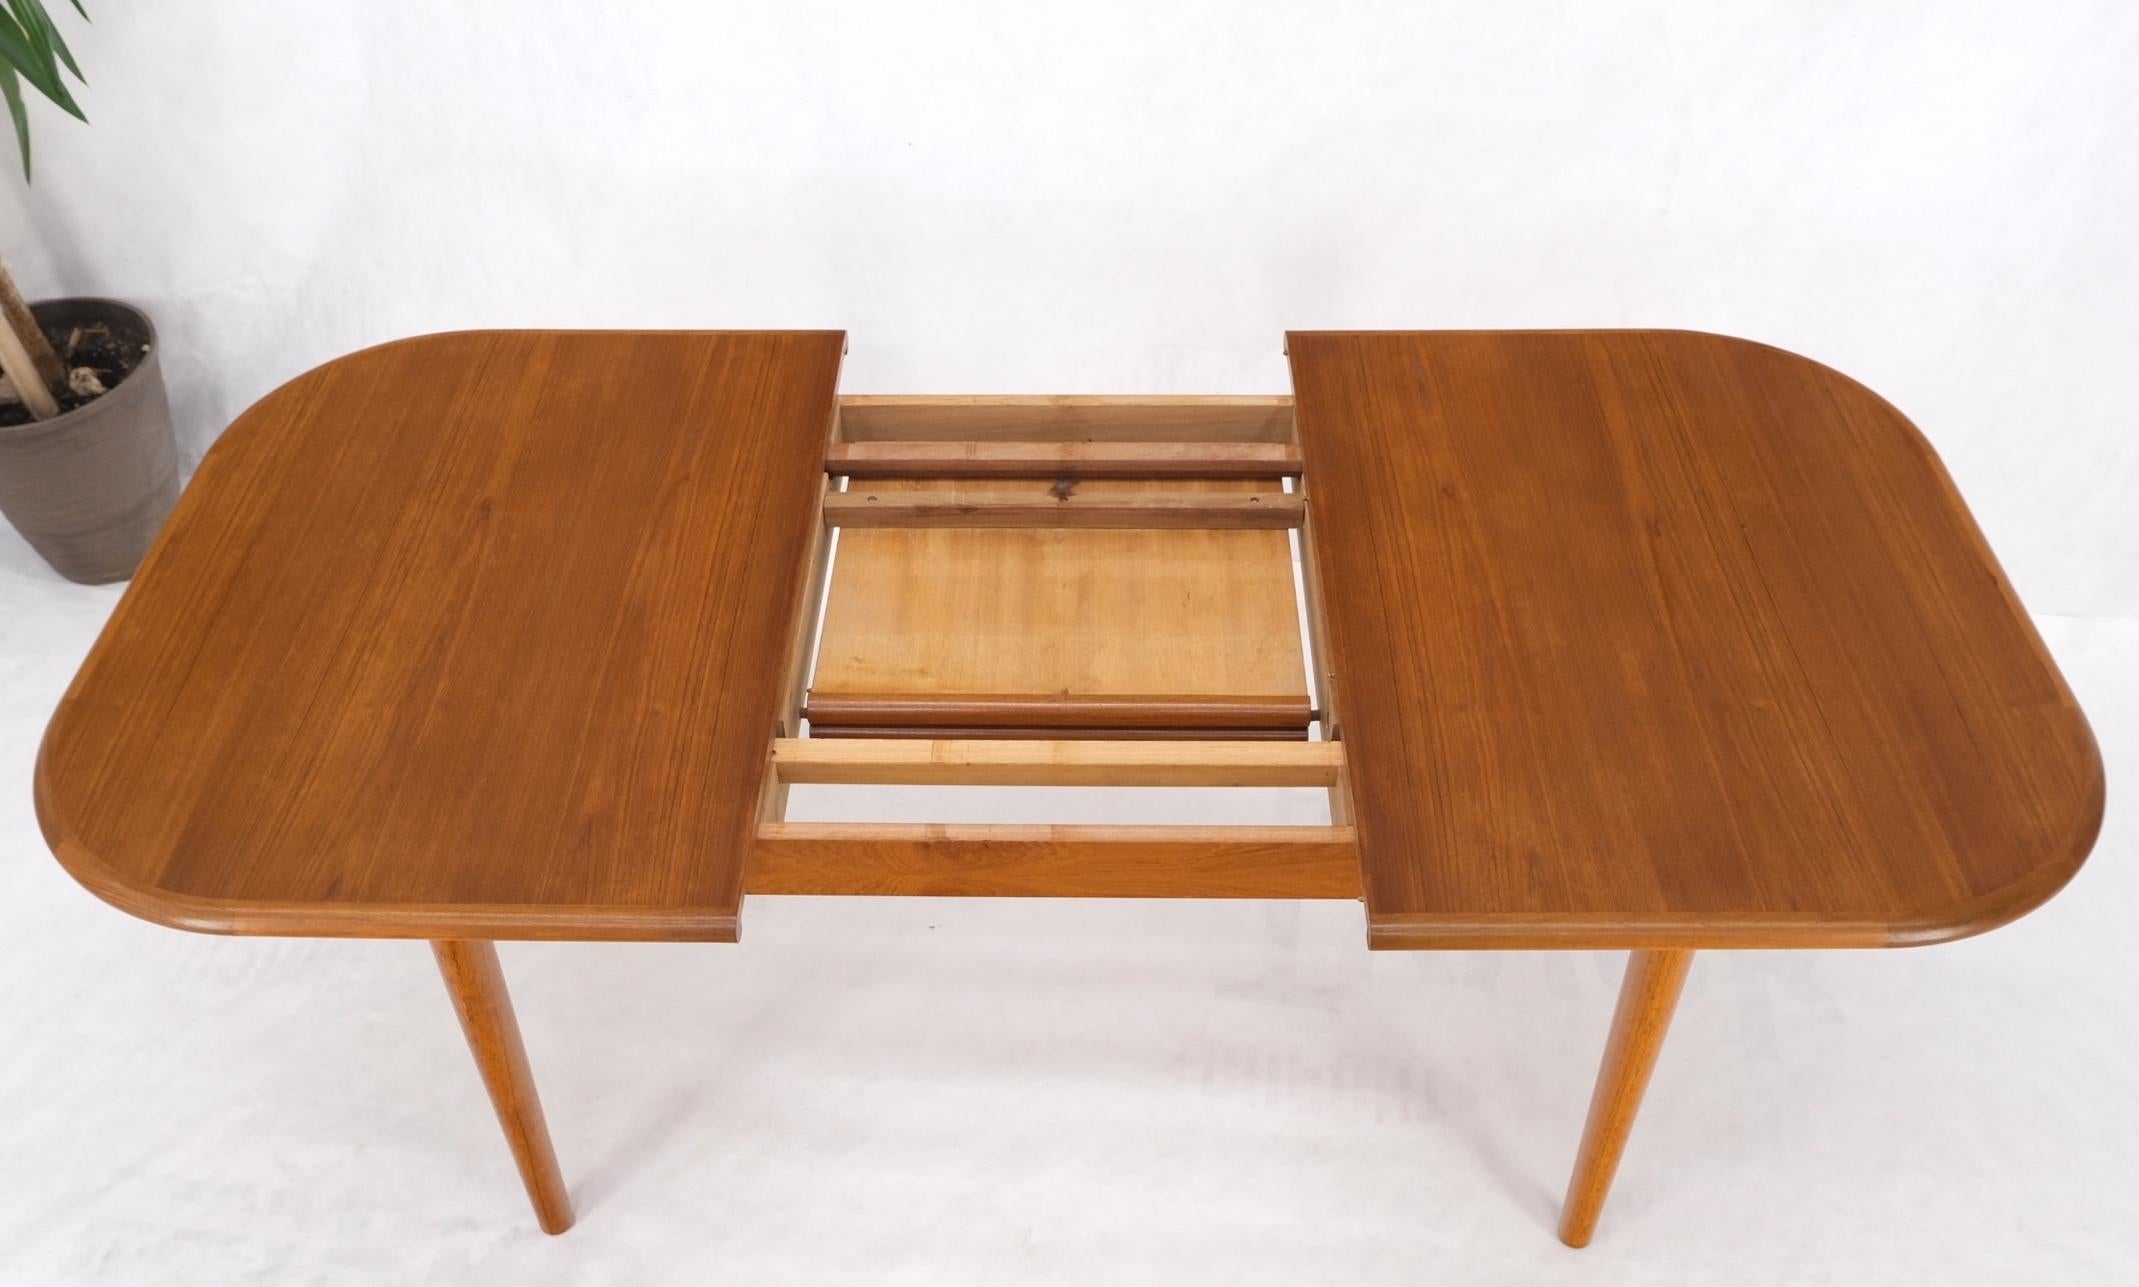 Danish teak rounded corners rectangle dining table one hide away extension board leaf mint.
One table leaf measures 20'' across.